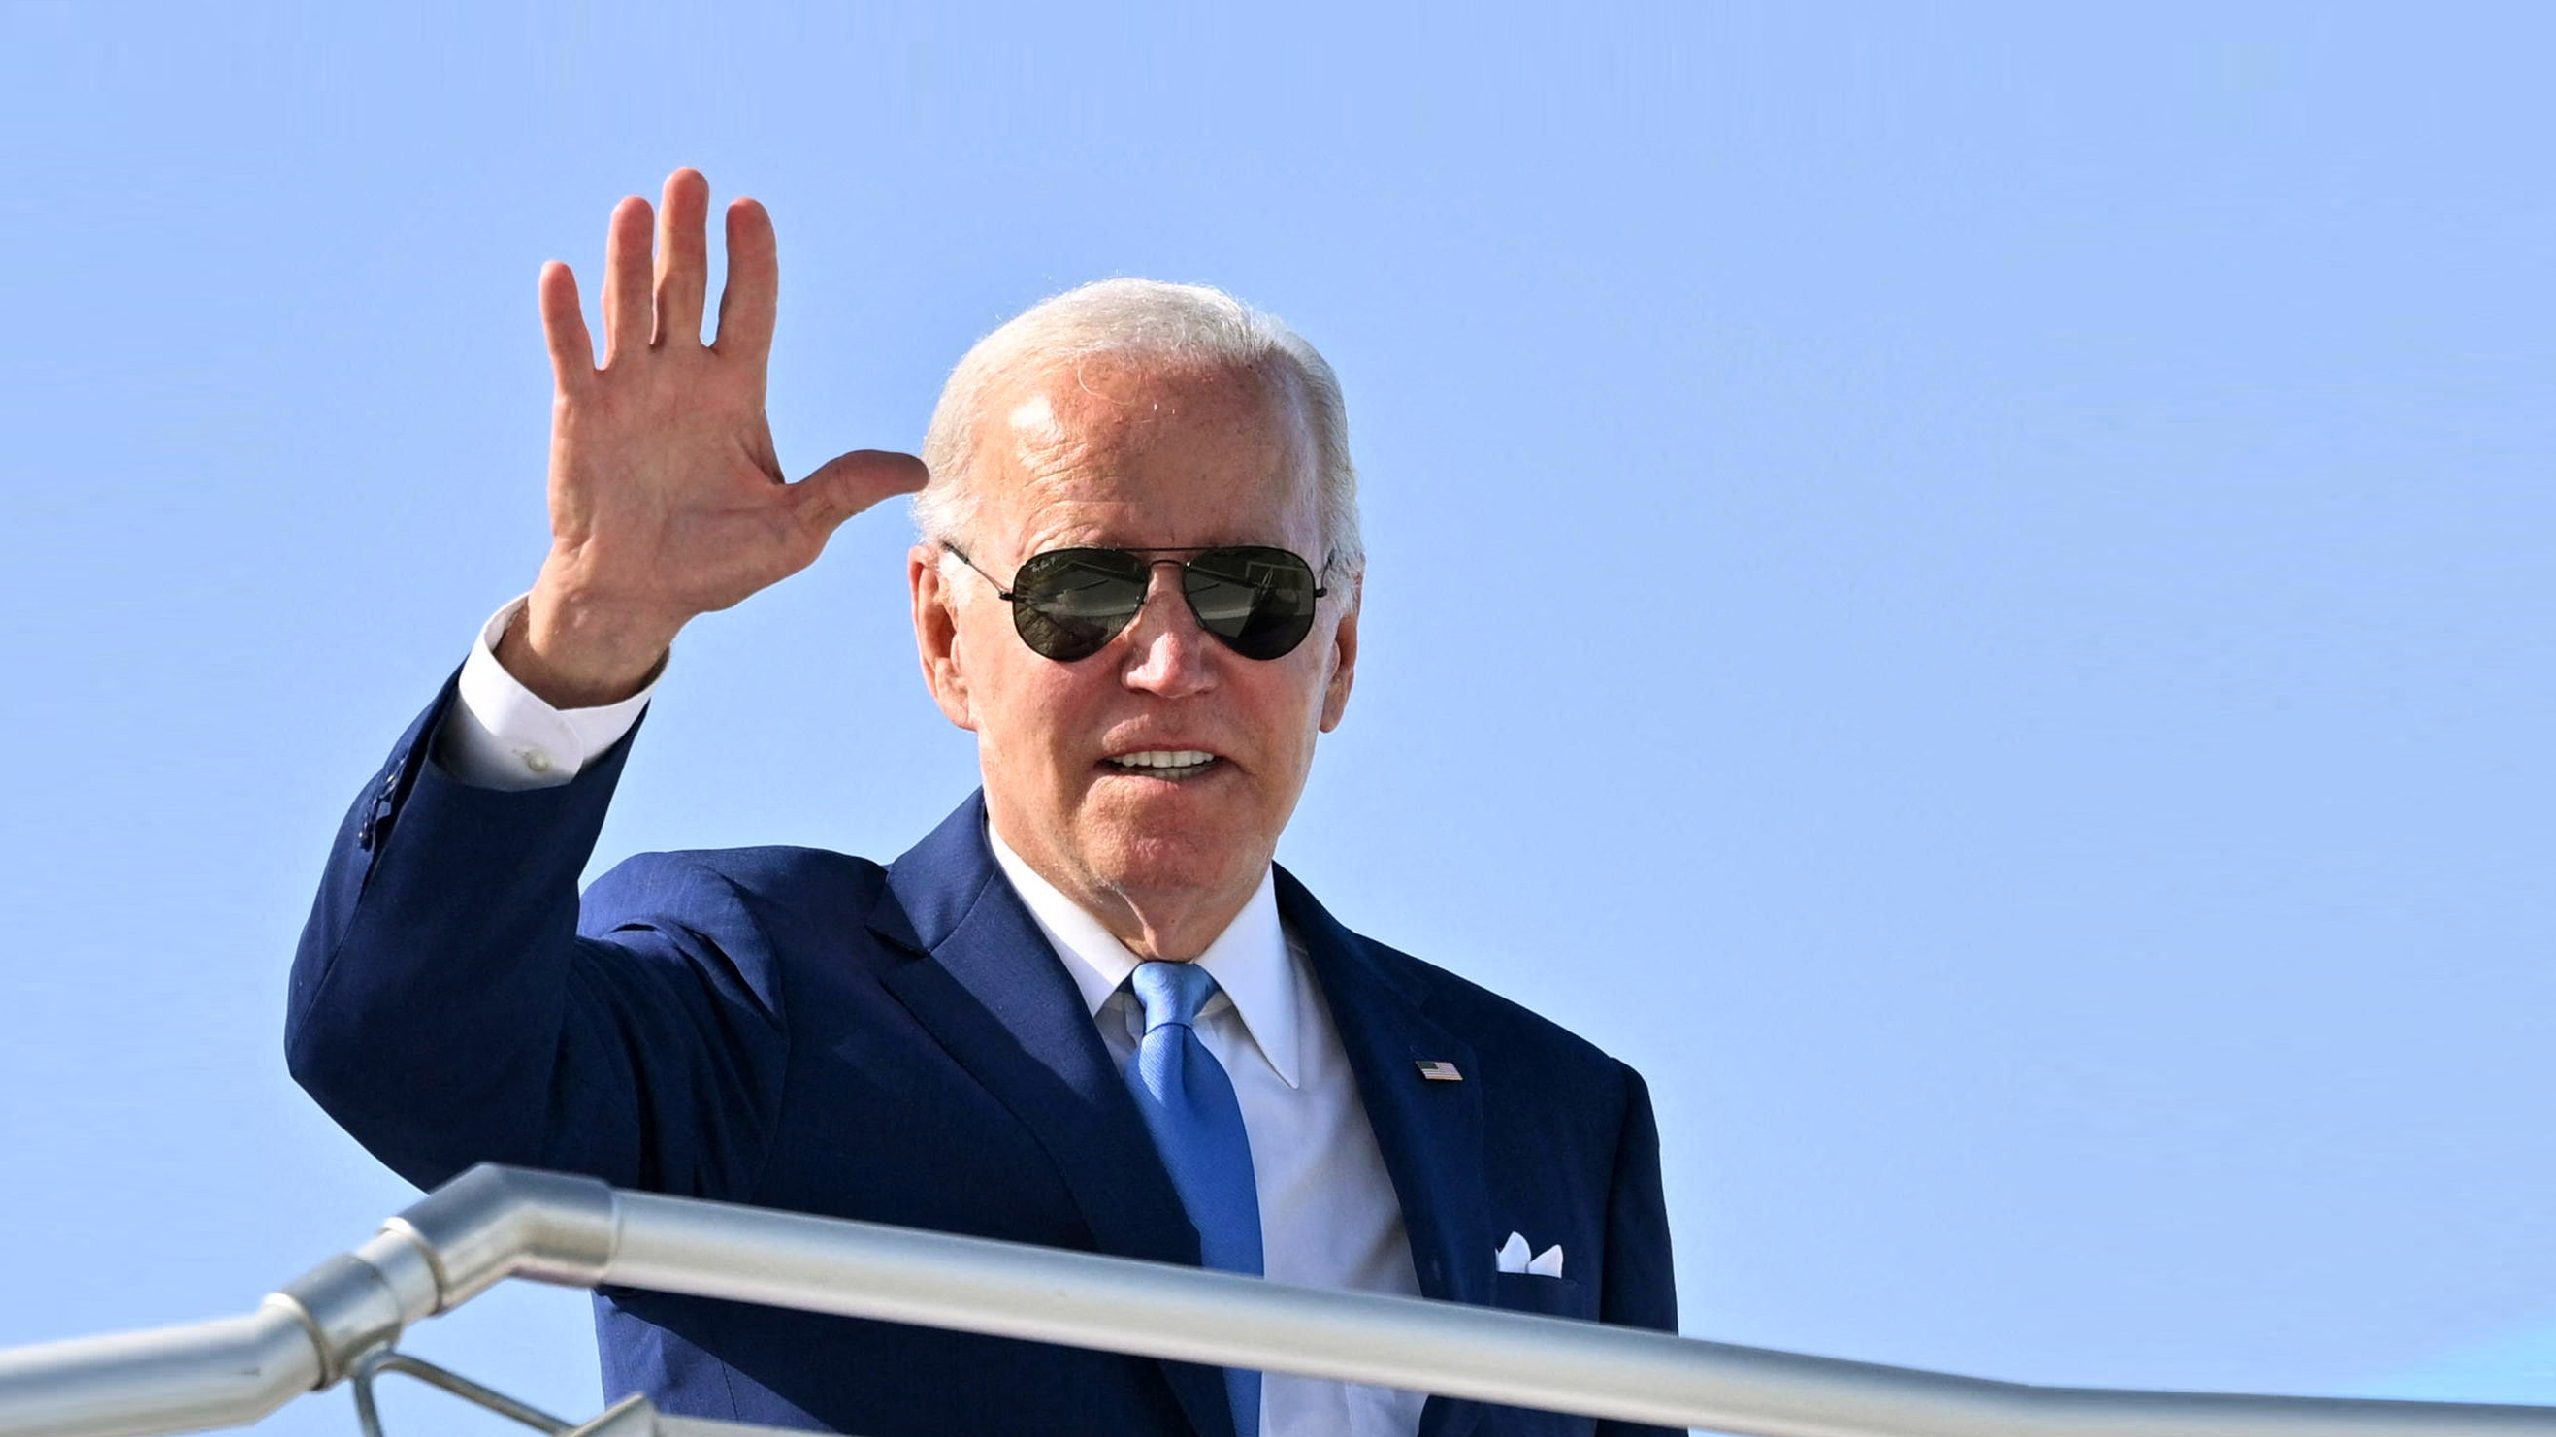 Biden Caught on Camera Saying Iran Nuclear Deal is ‘Dead’